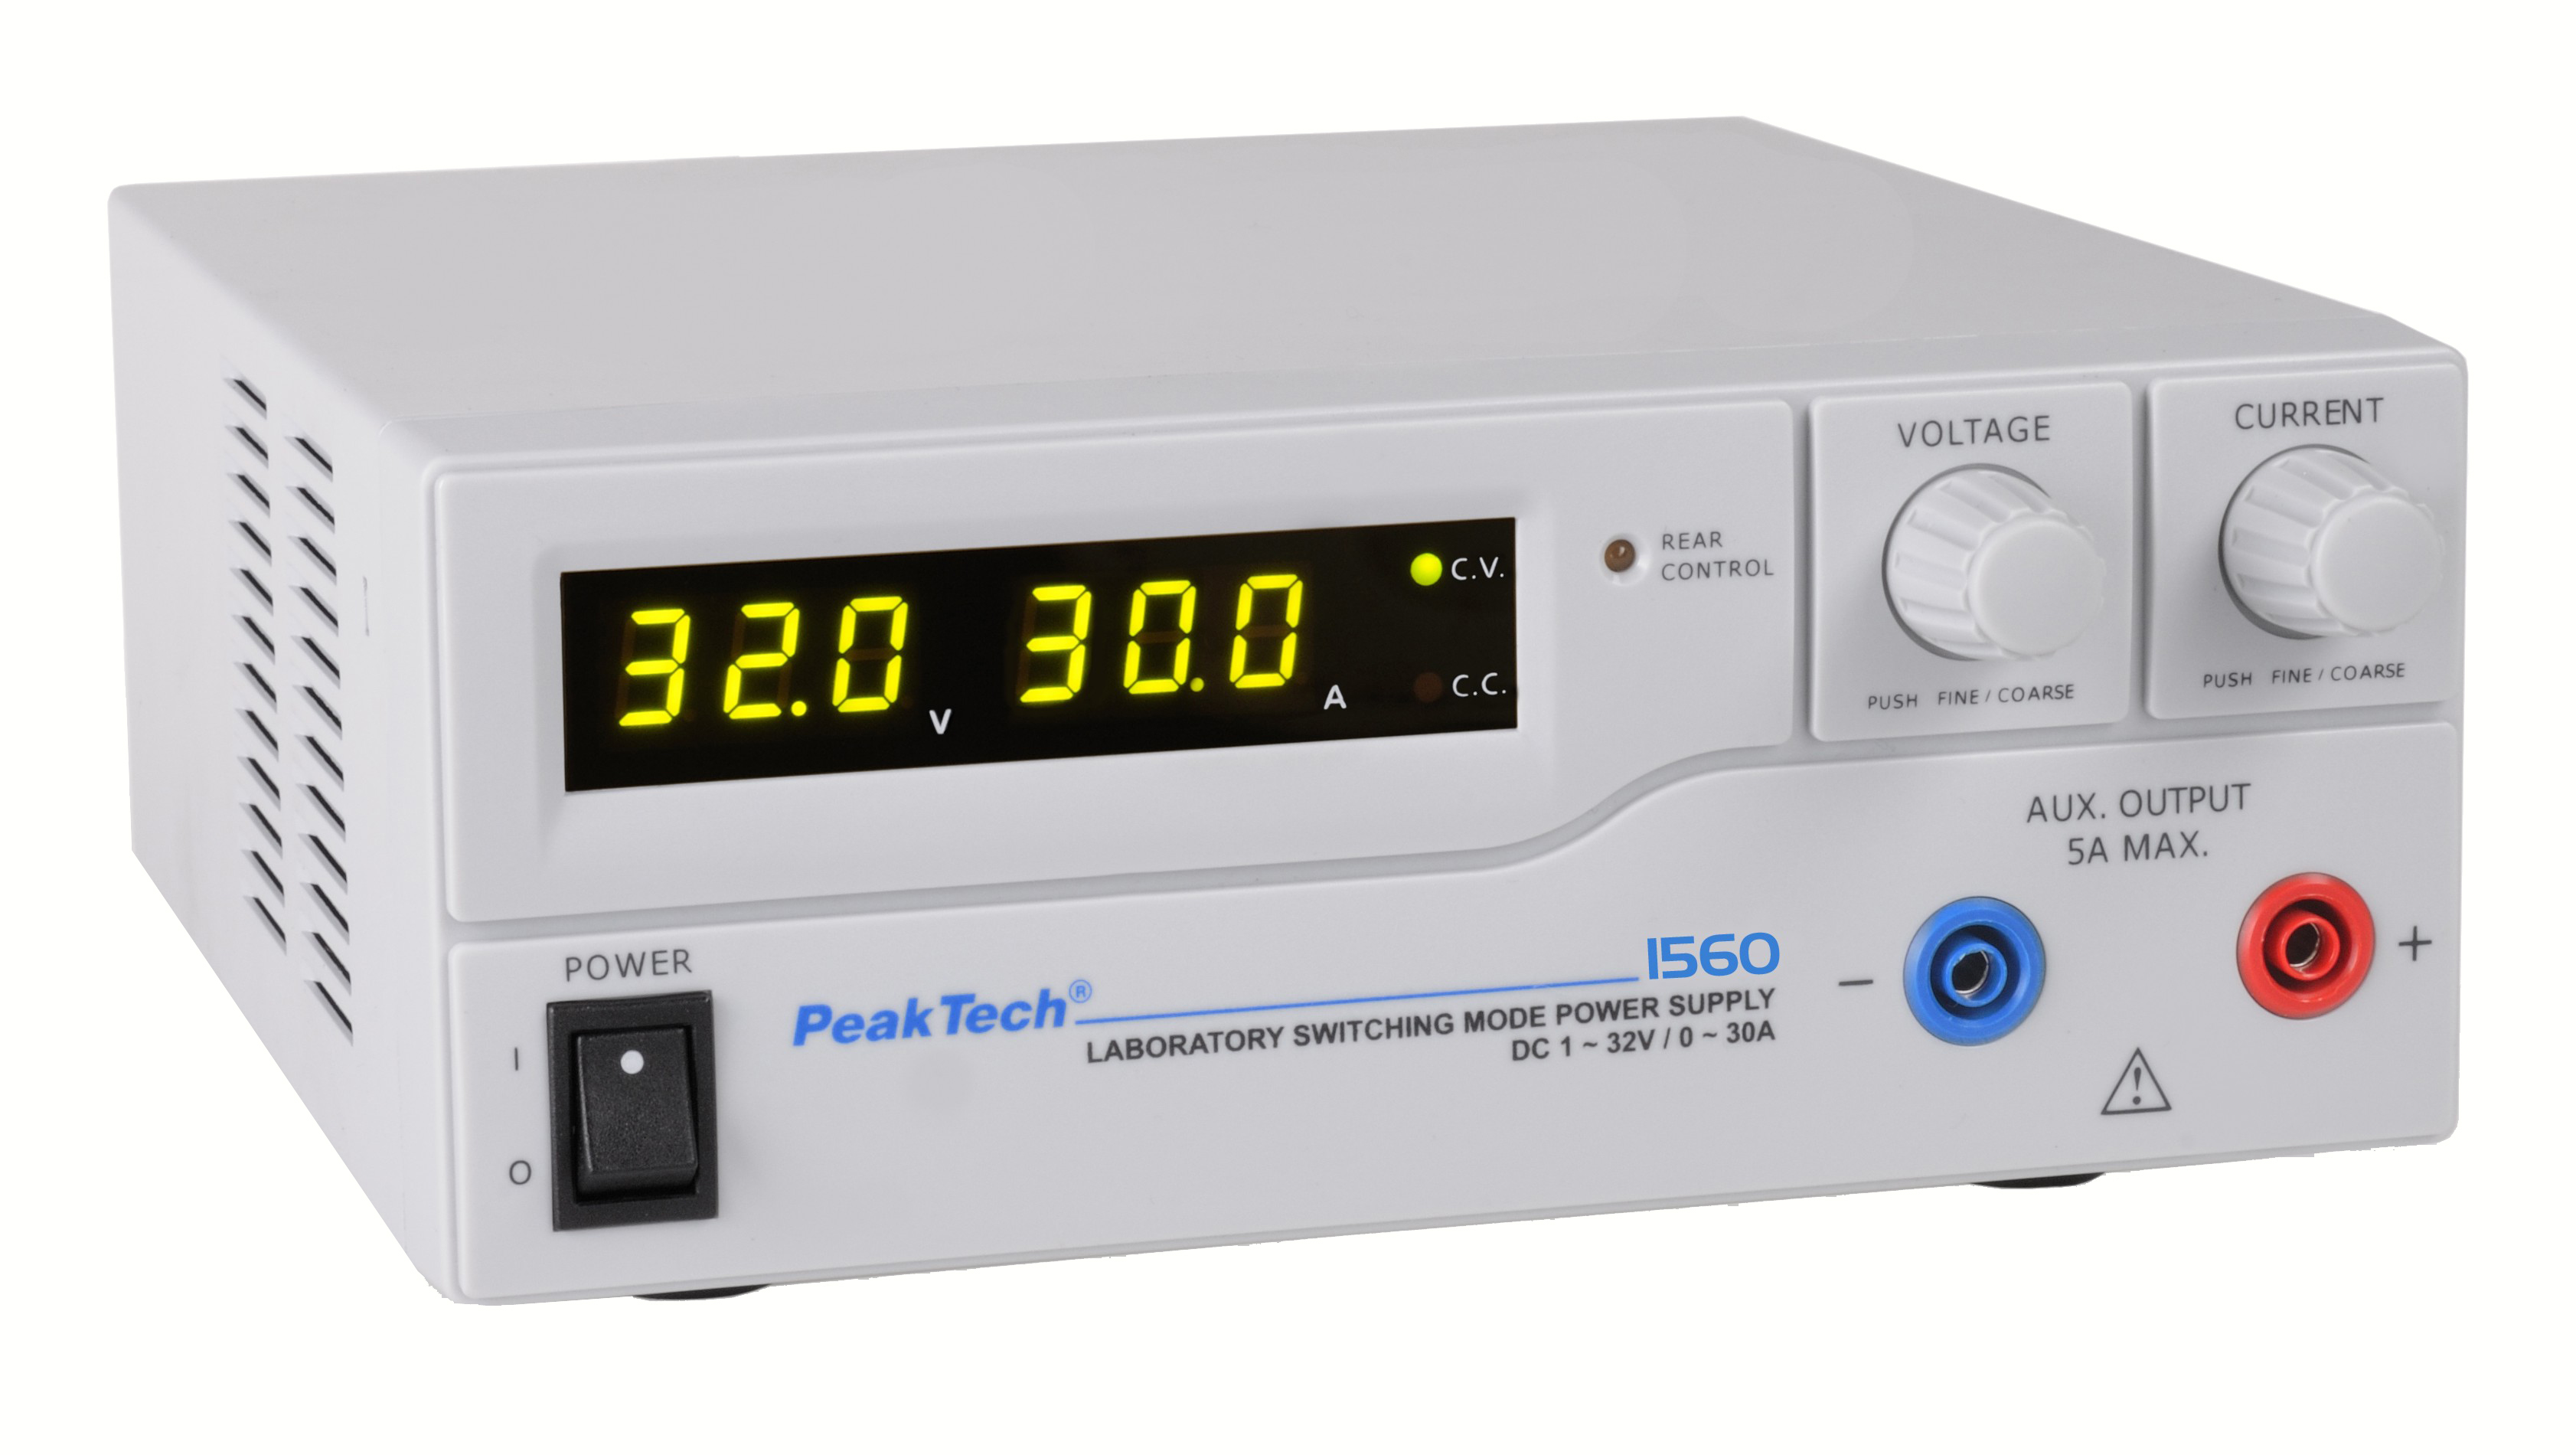 «PeakTech® P 1560» Laboratory power supply DC 1 - 32 V / 0 - 30 A